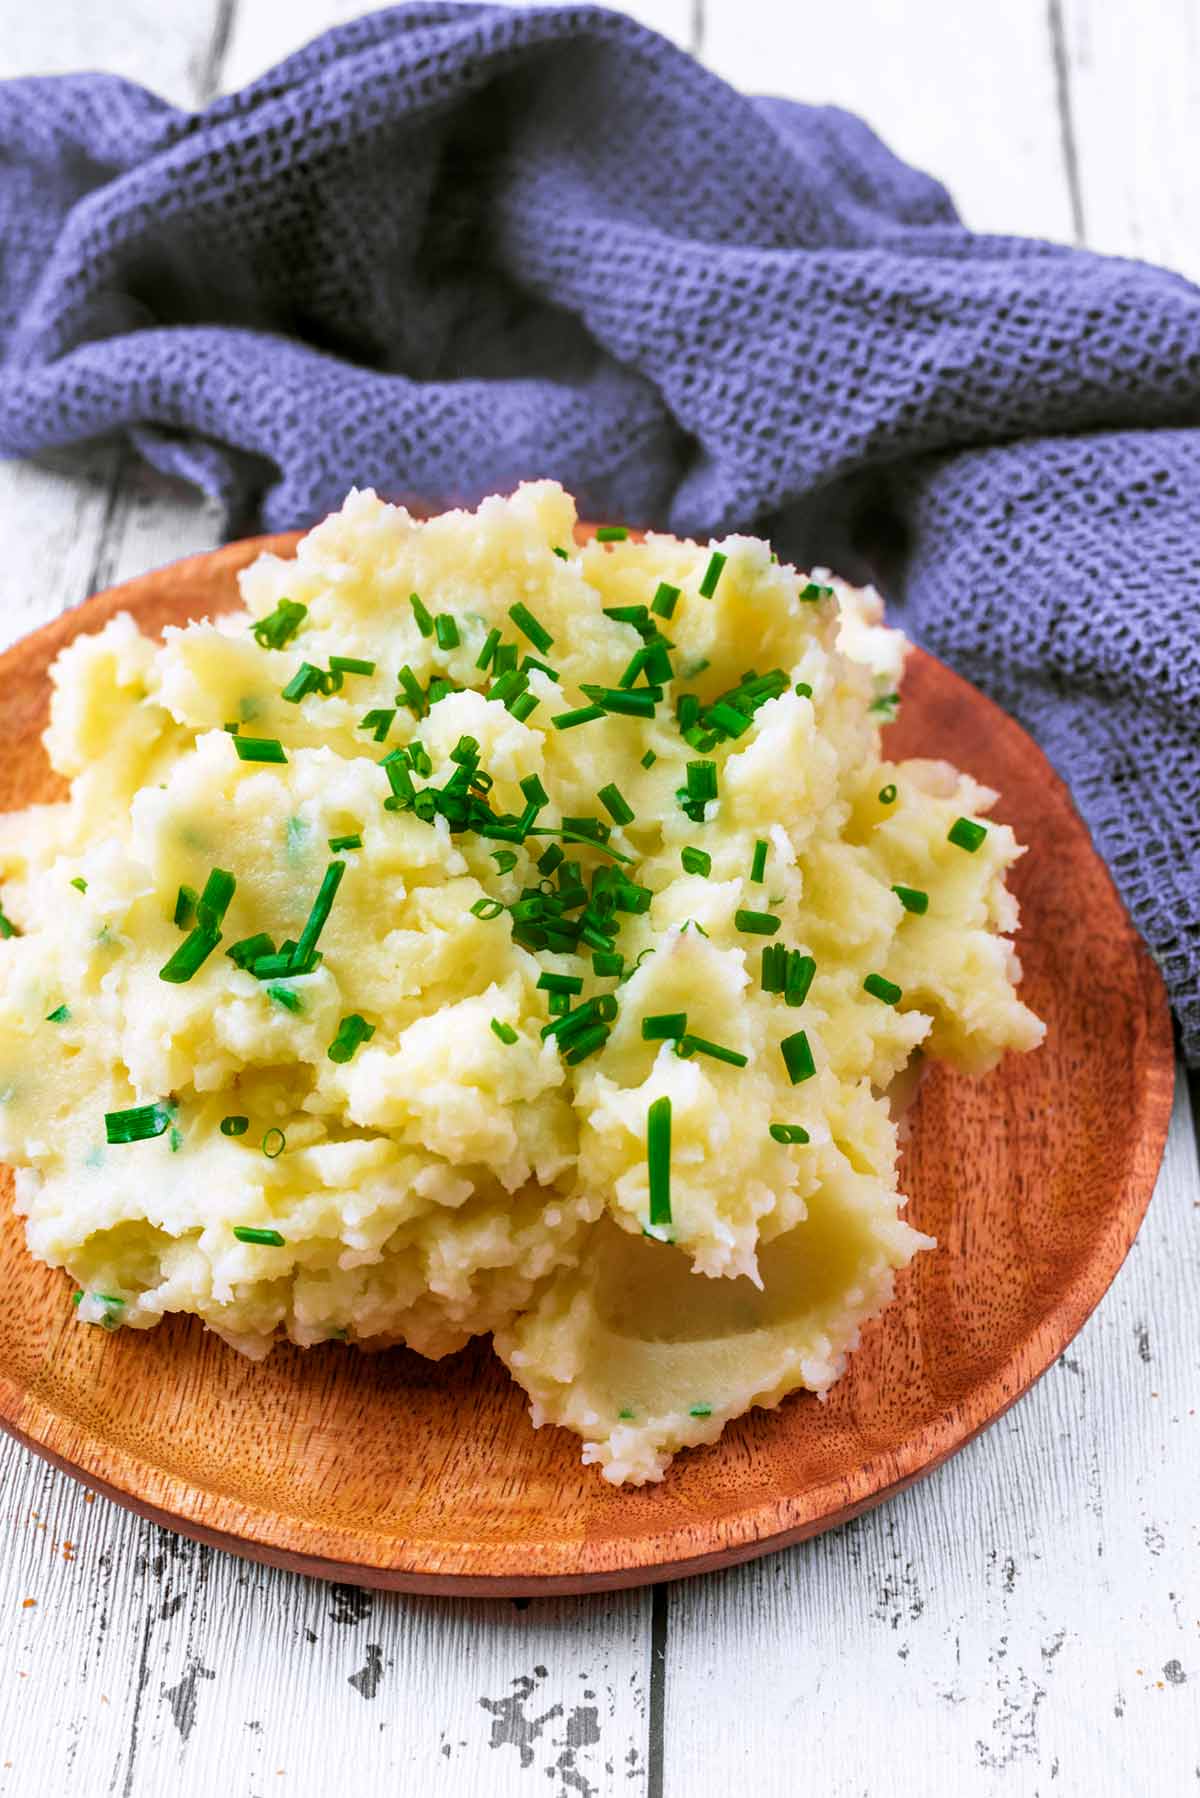 A plate of mash potato and chives.